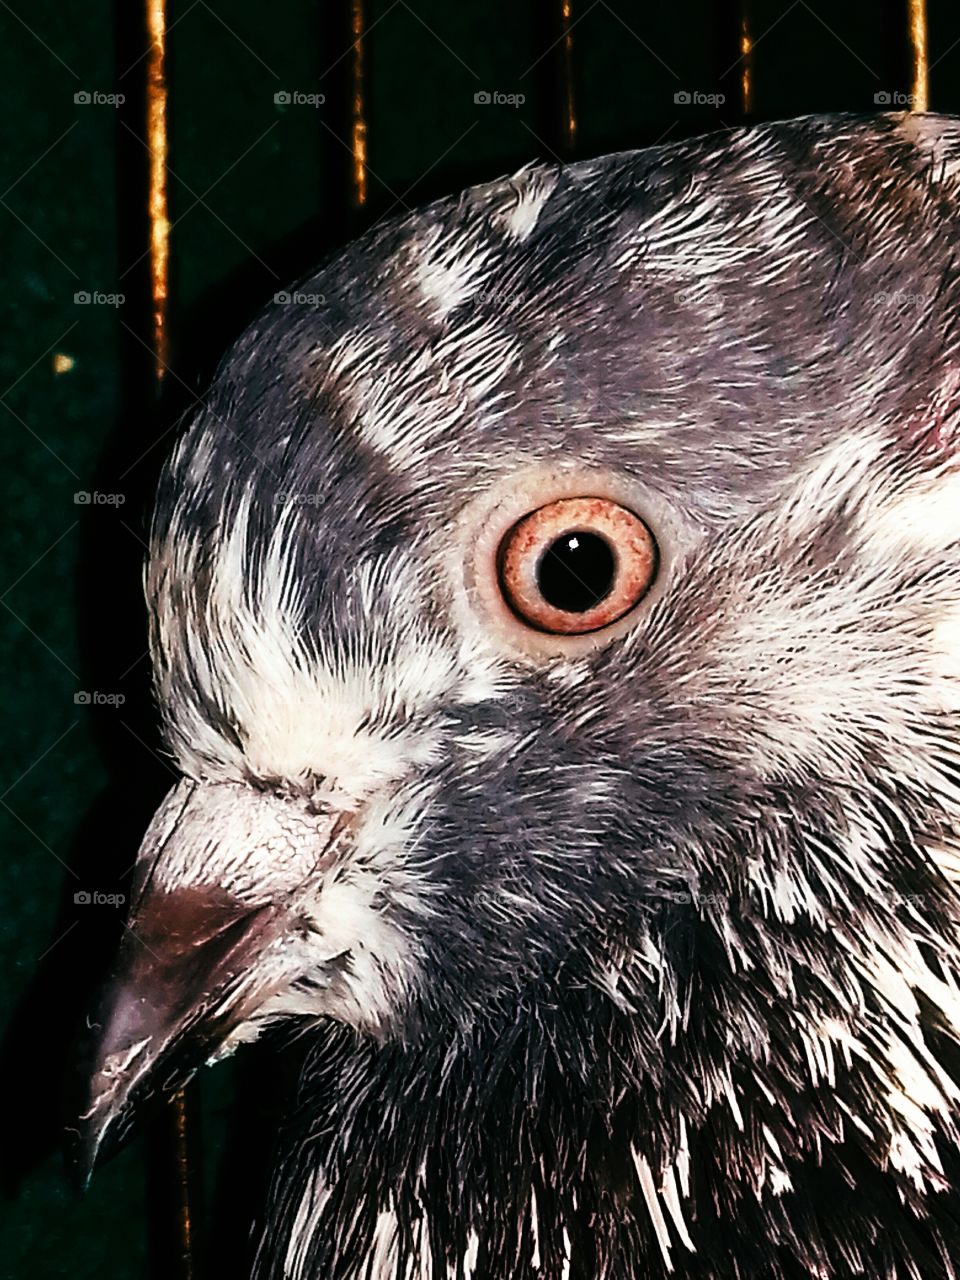 Pigeon Eyes close picture